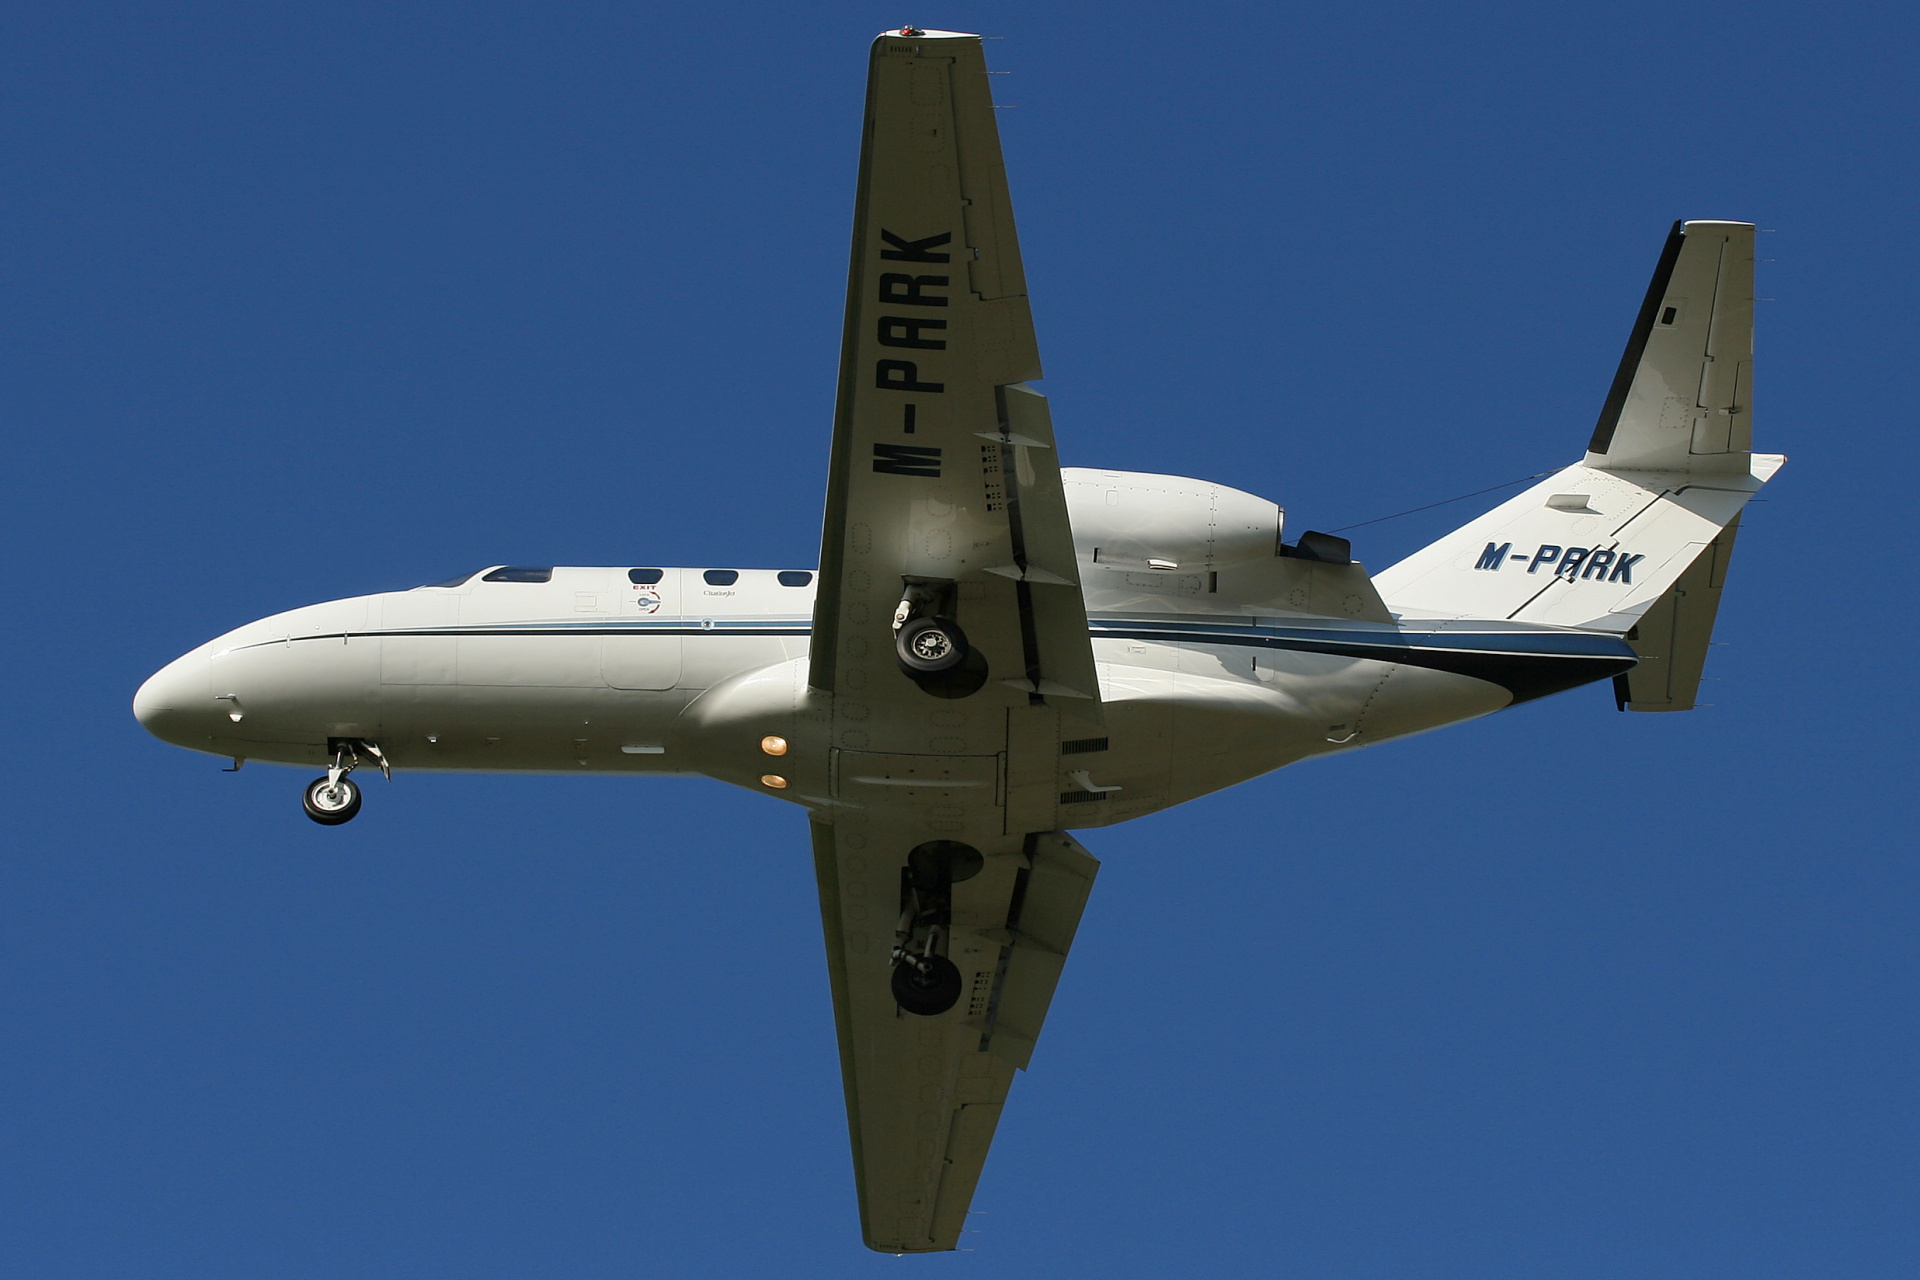 M-PARK, private (Aircraft » EPWA Spotting » Cessna 525 (CitationJet) and revisions)